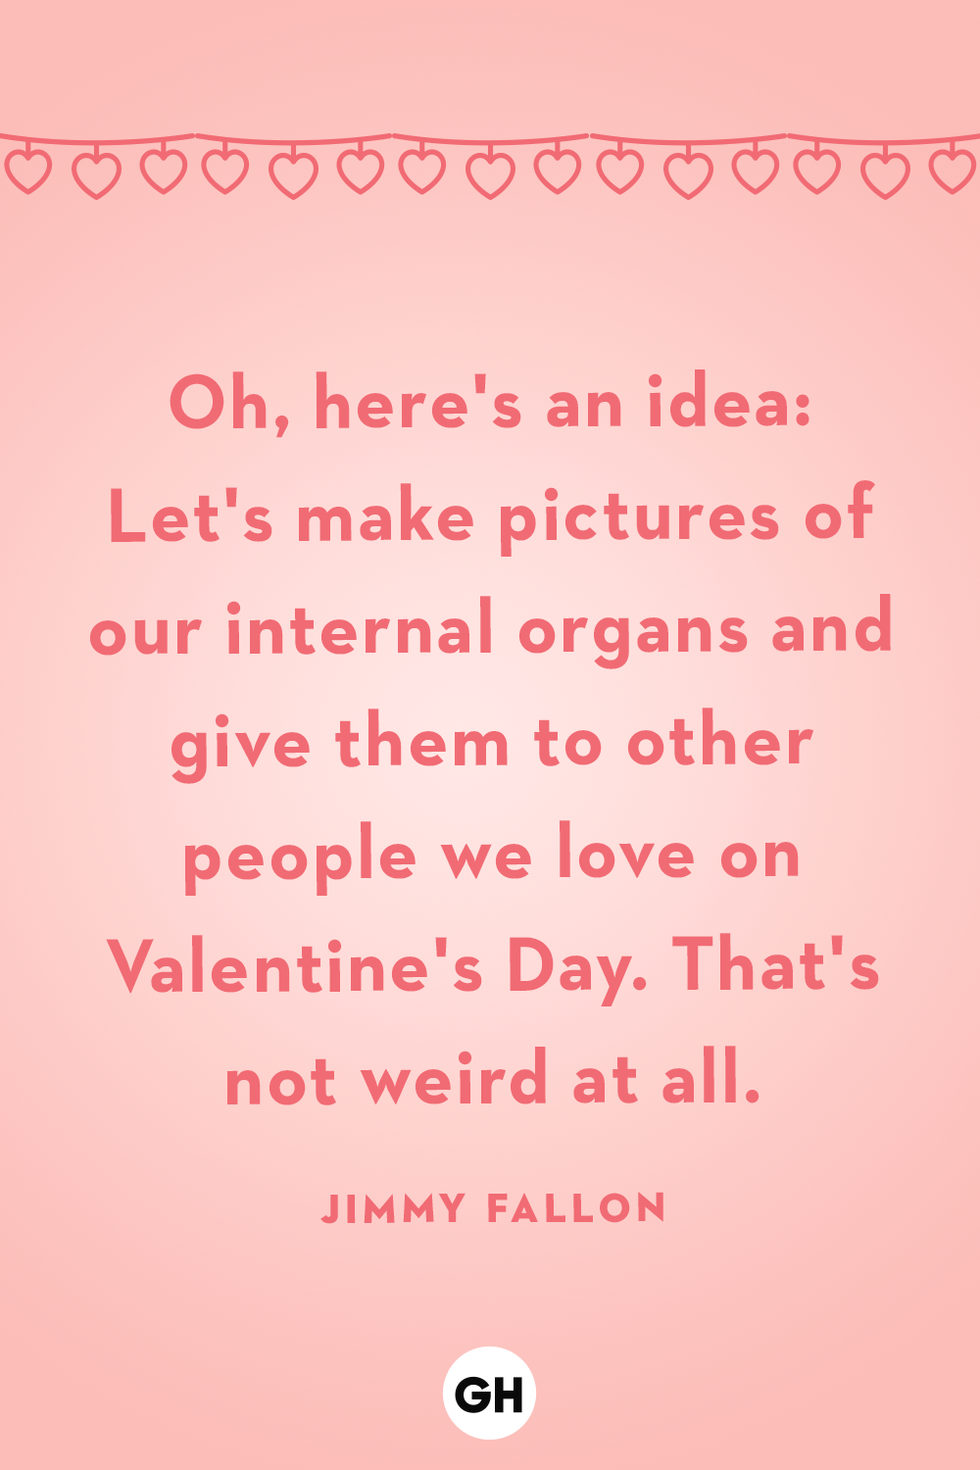 oh here's an idea let's make pictures of our internal organs and give them to other people we love on valentine's day that's not weird at all jimmy fallon